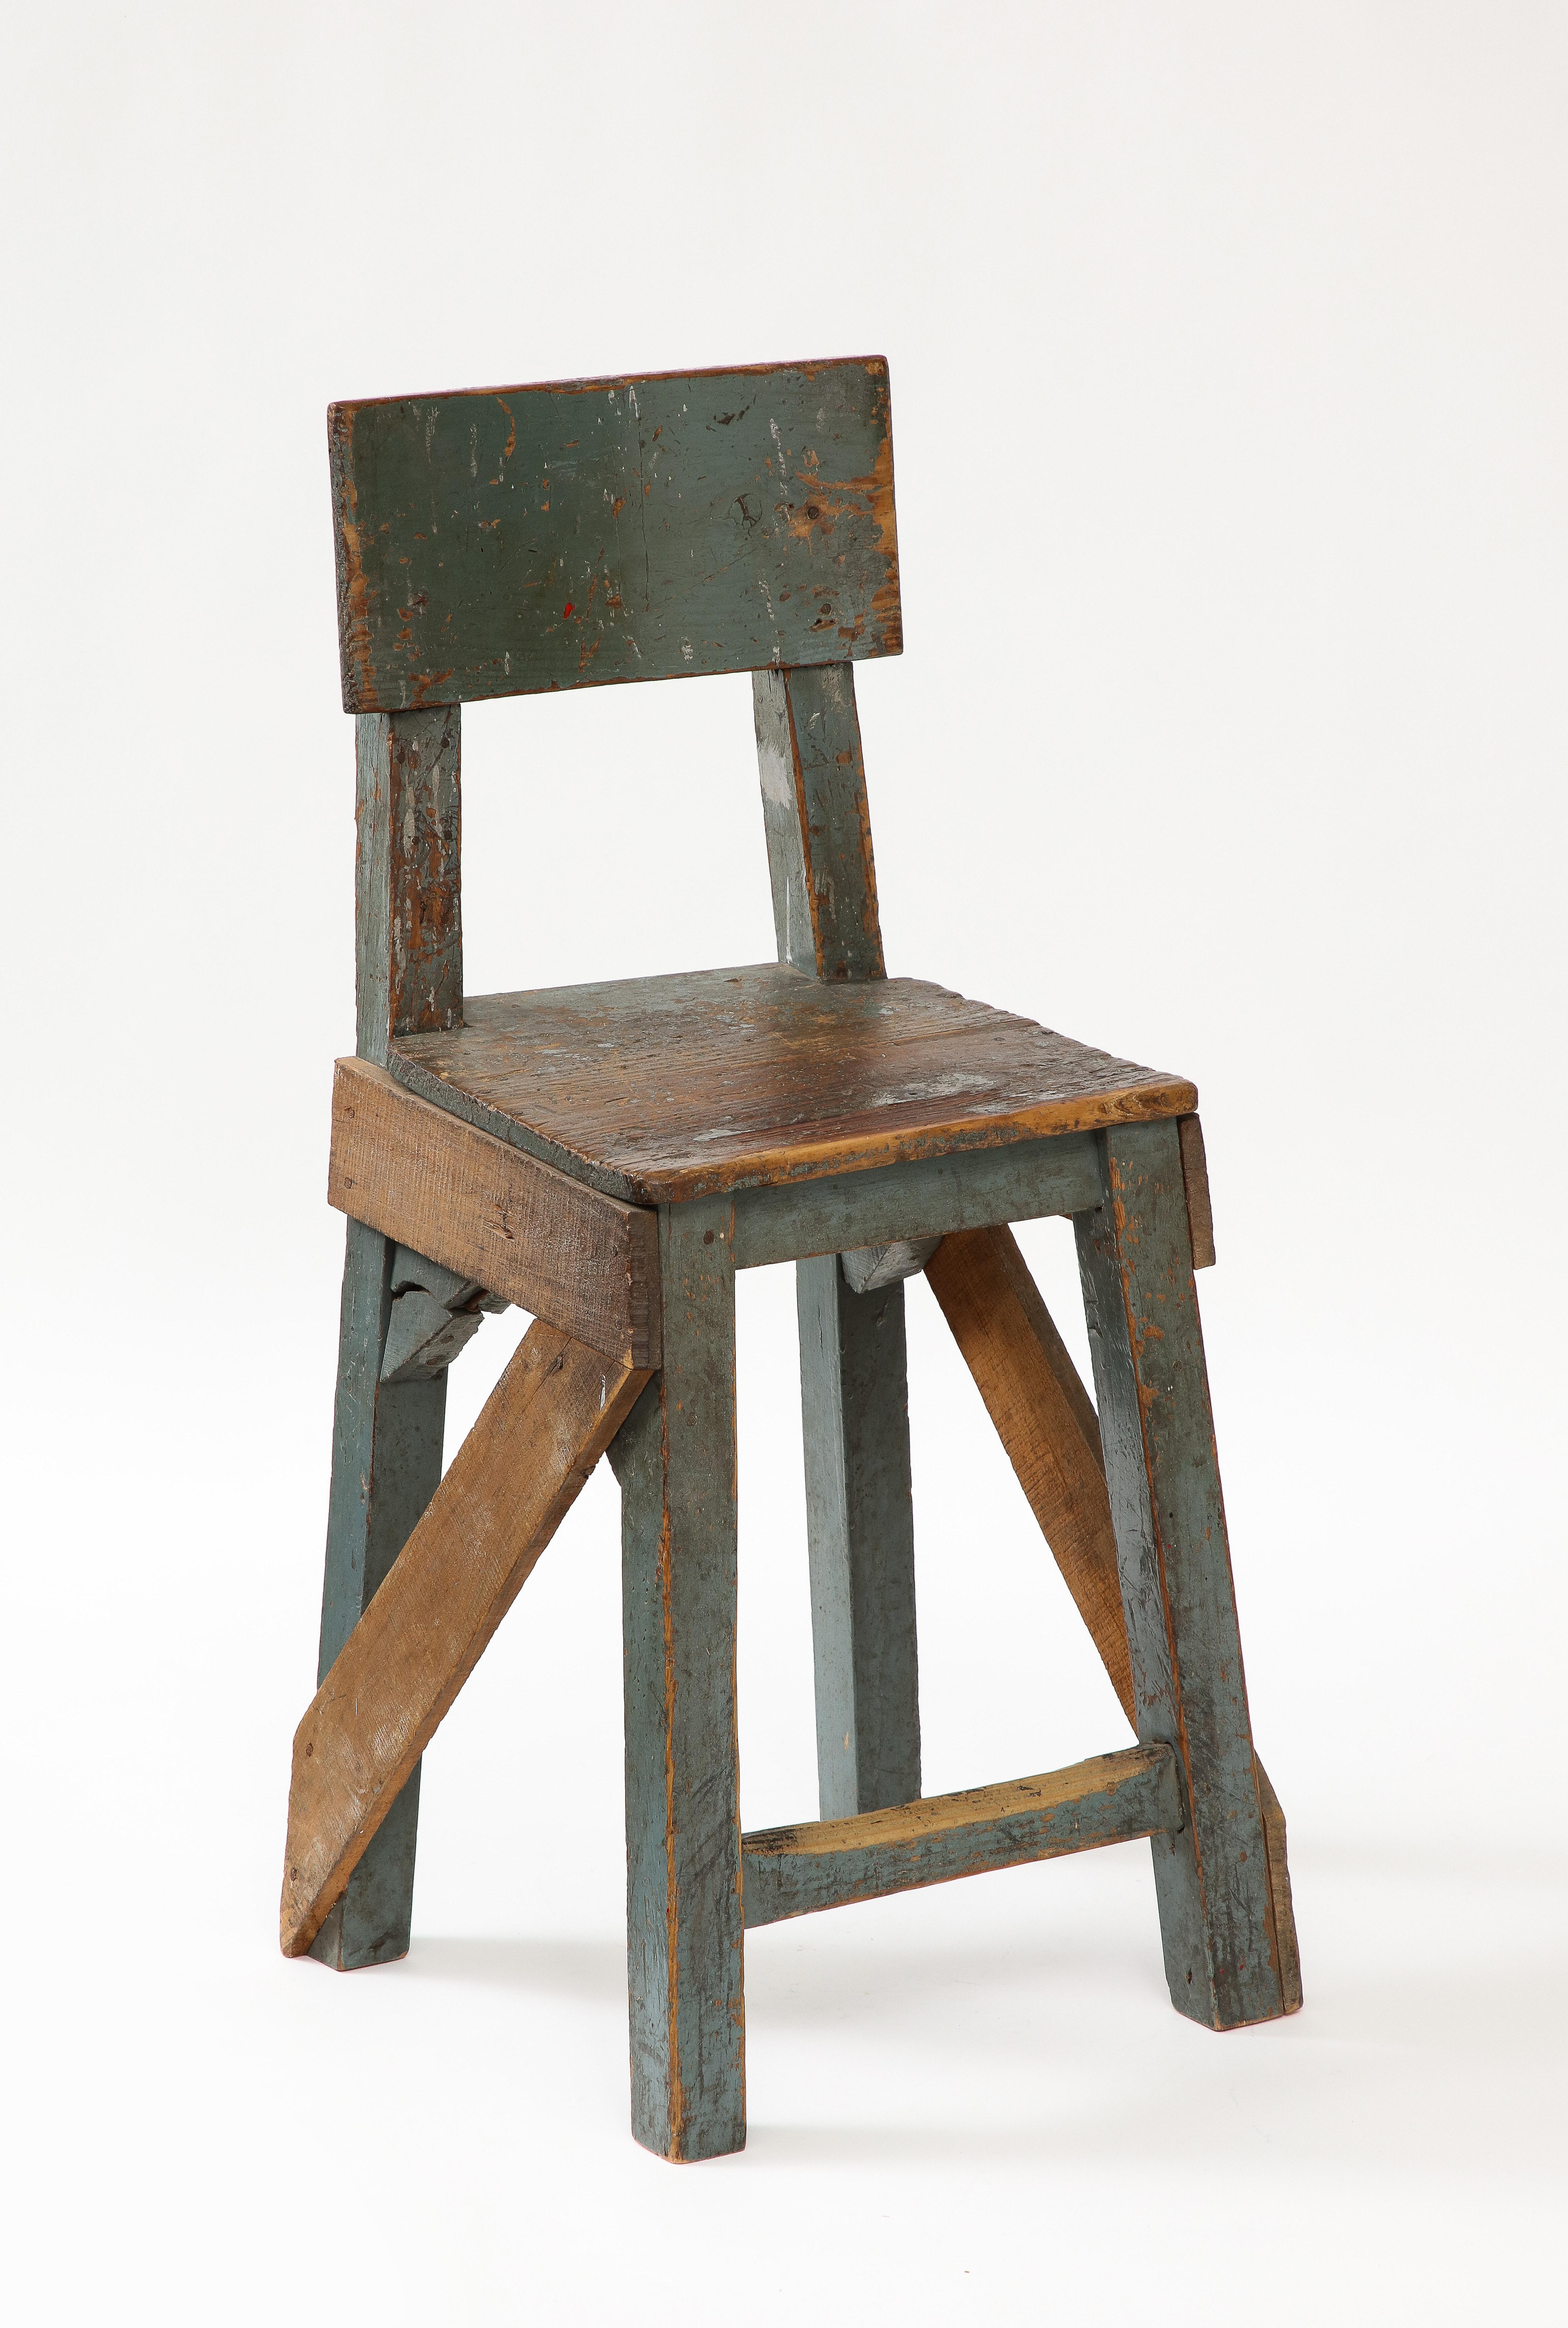 French Primitive Artist’s Chair, c. 1950 For Sale 9